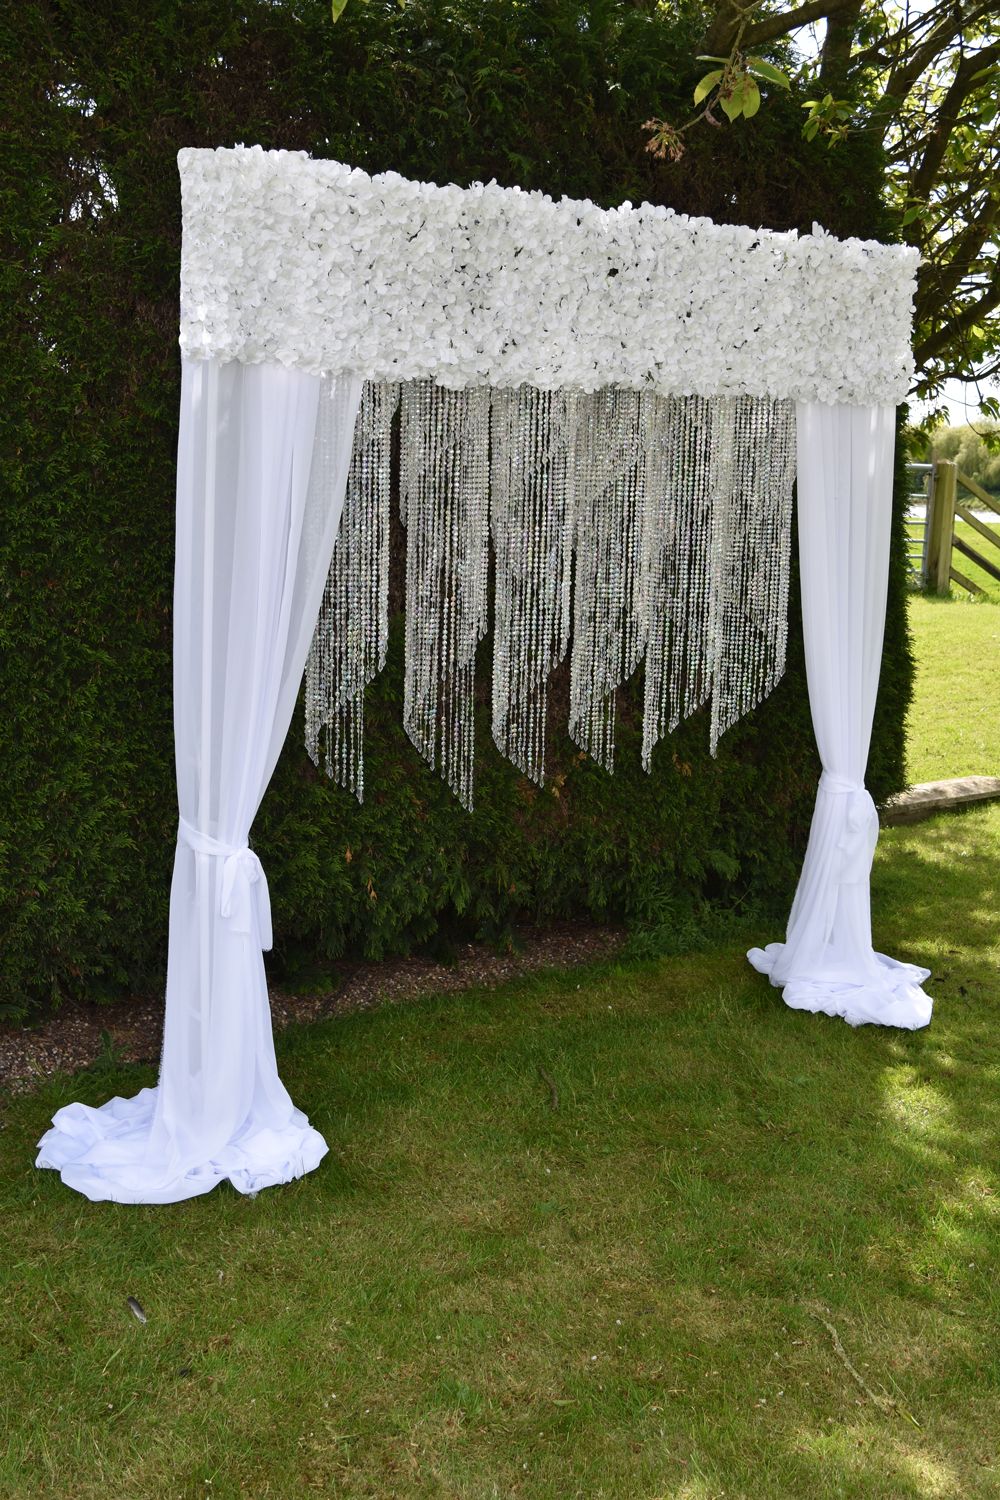 Decor & furniture hire, marquee hire, package hire